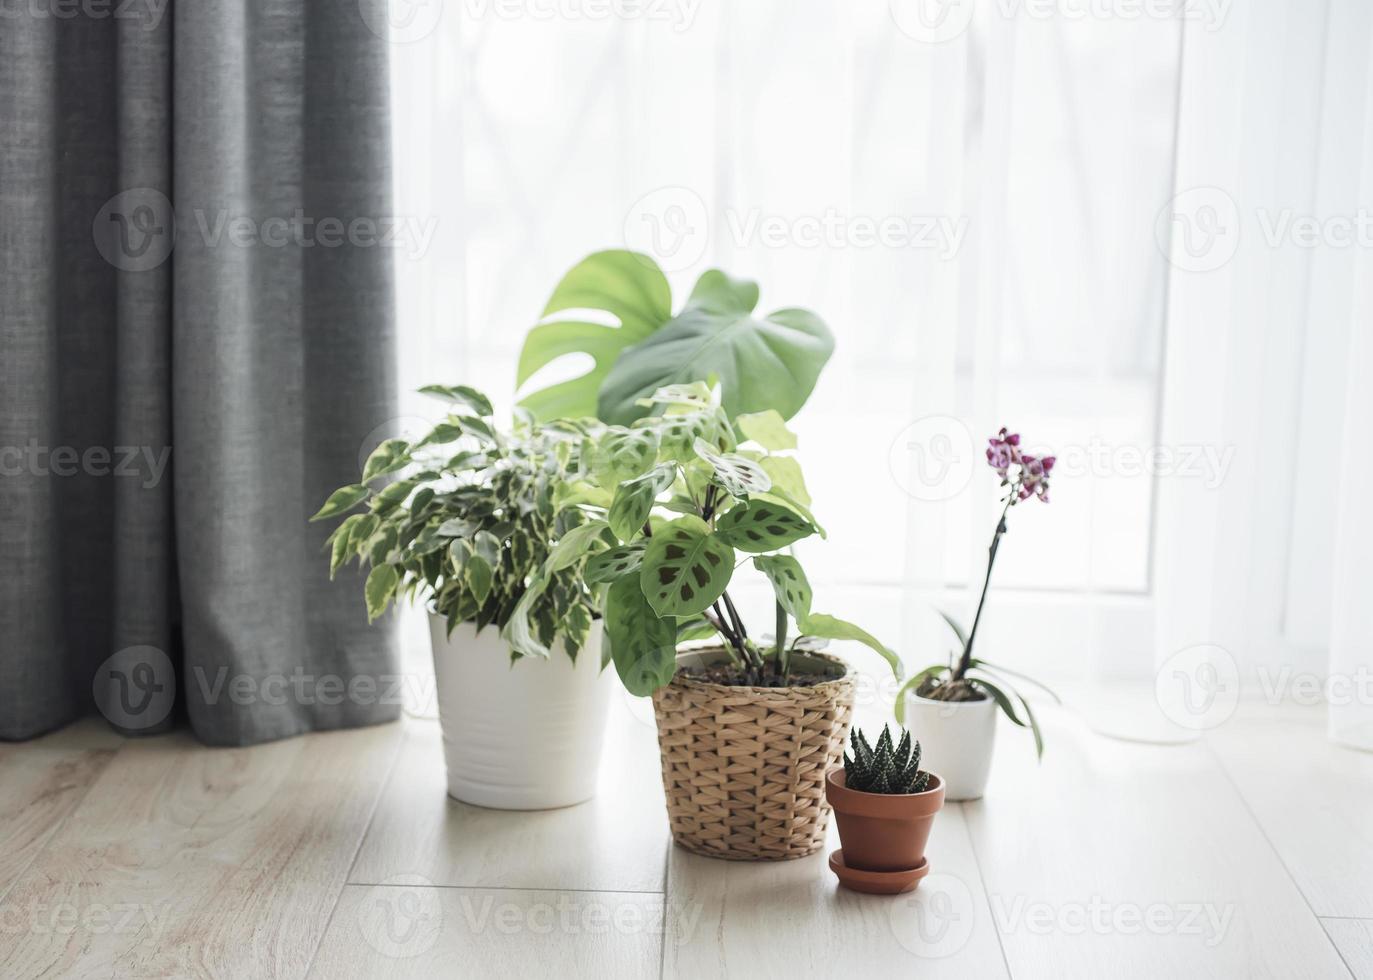 Different house plants on the floor photo